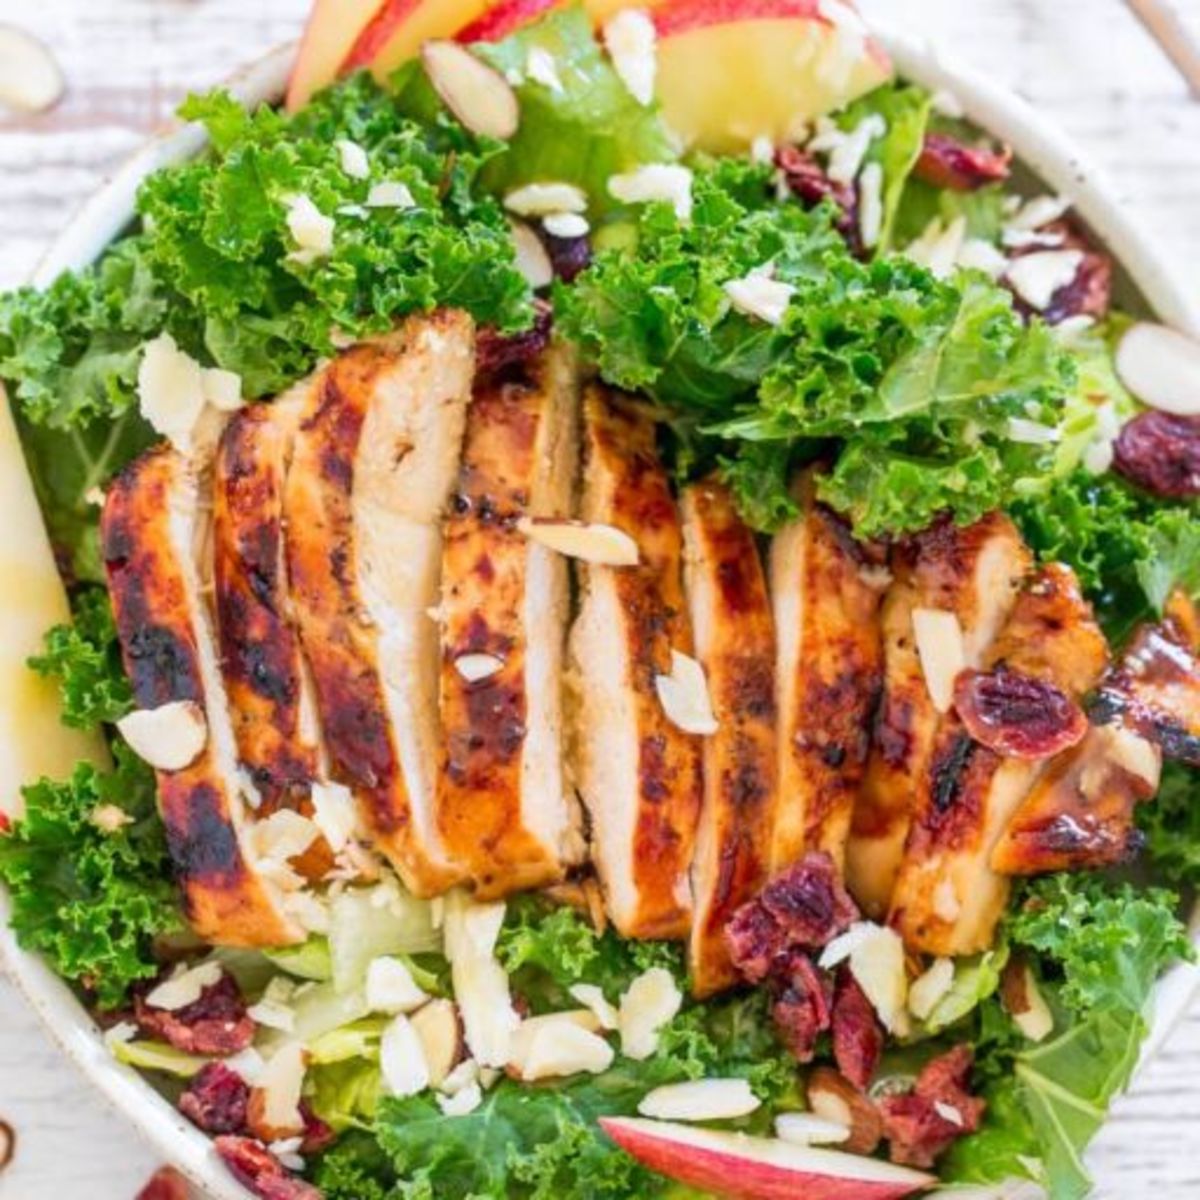 Grilled chicken salad with apple and white cheddar